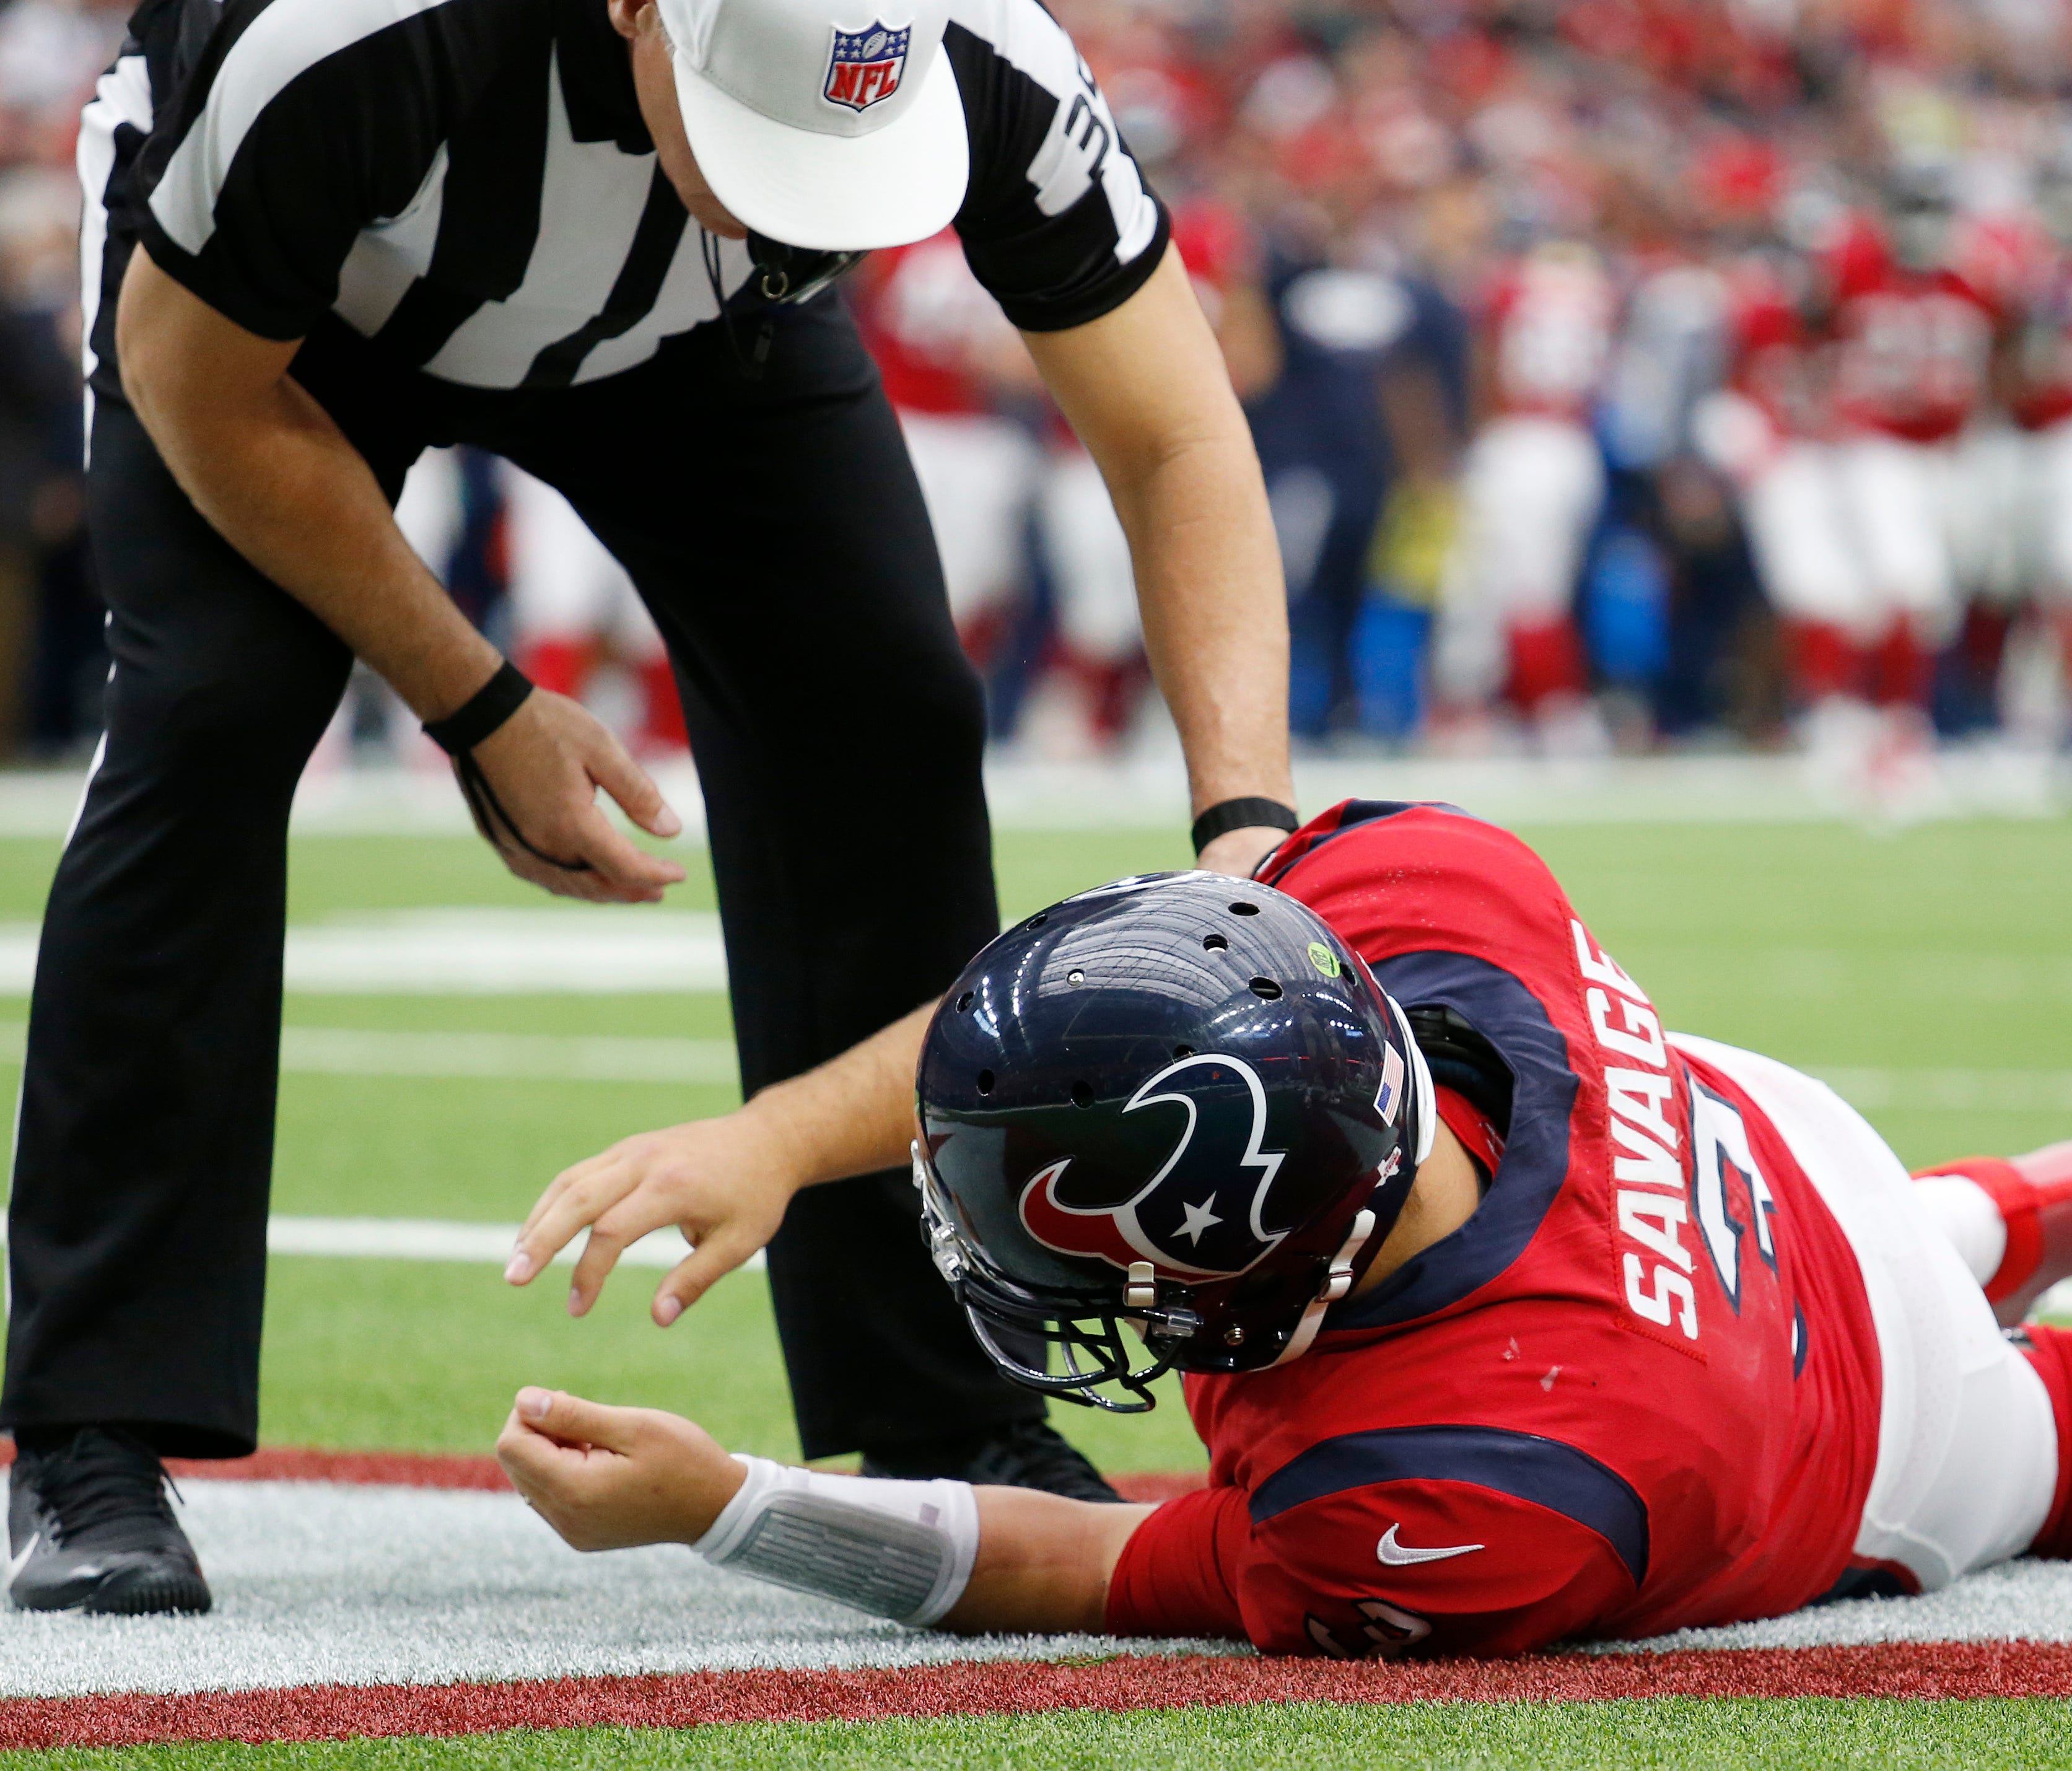 Referee John Hussey checks on Houston Texans quarterback Tom Savage after the hit that would ultimately knock him out of Sunday's game with the 49ers.